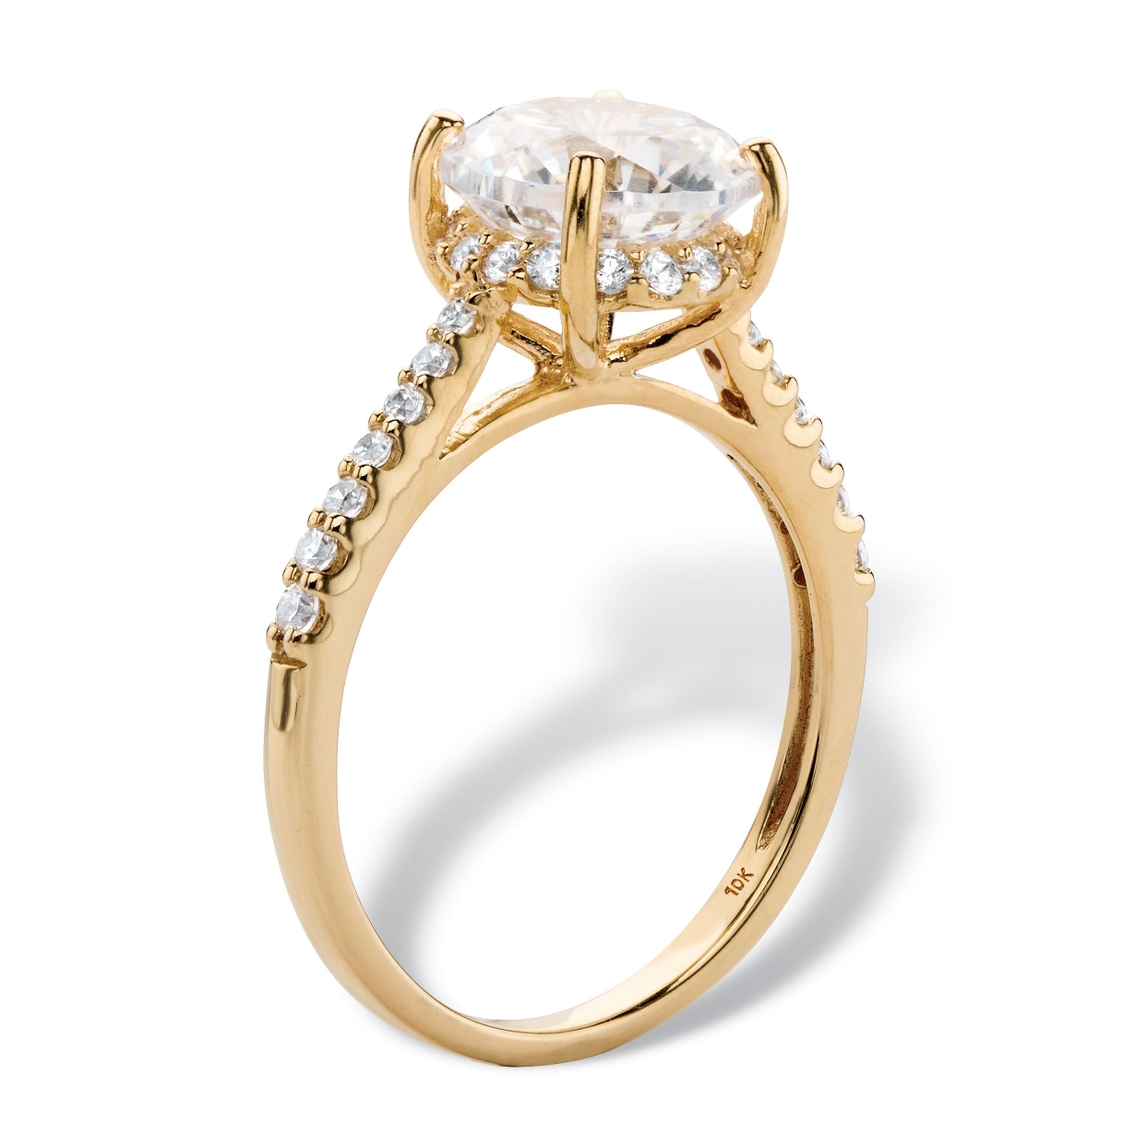 3.31 TCW Round White Cubic Zirconia Bridal Engagement Ring in Solid 10k Yellow Gold - Image 2 of 5